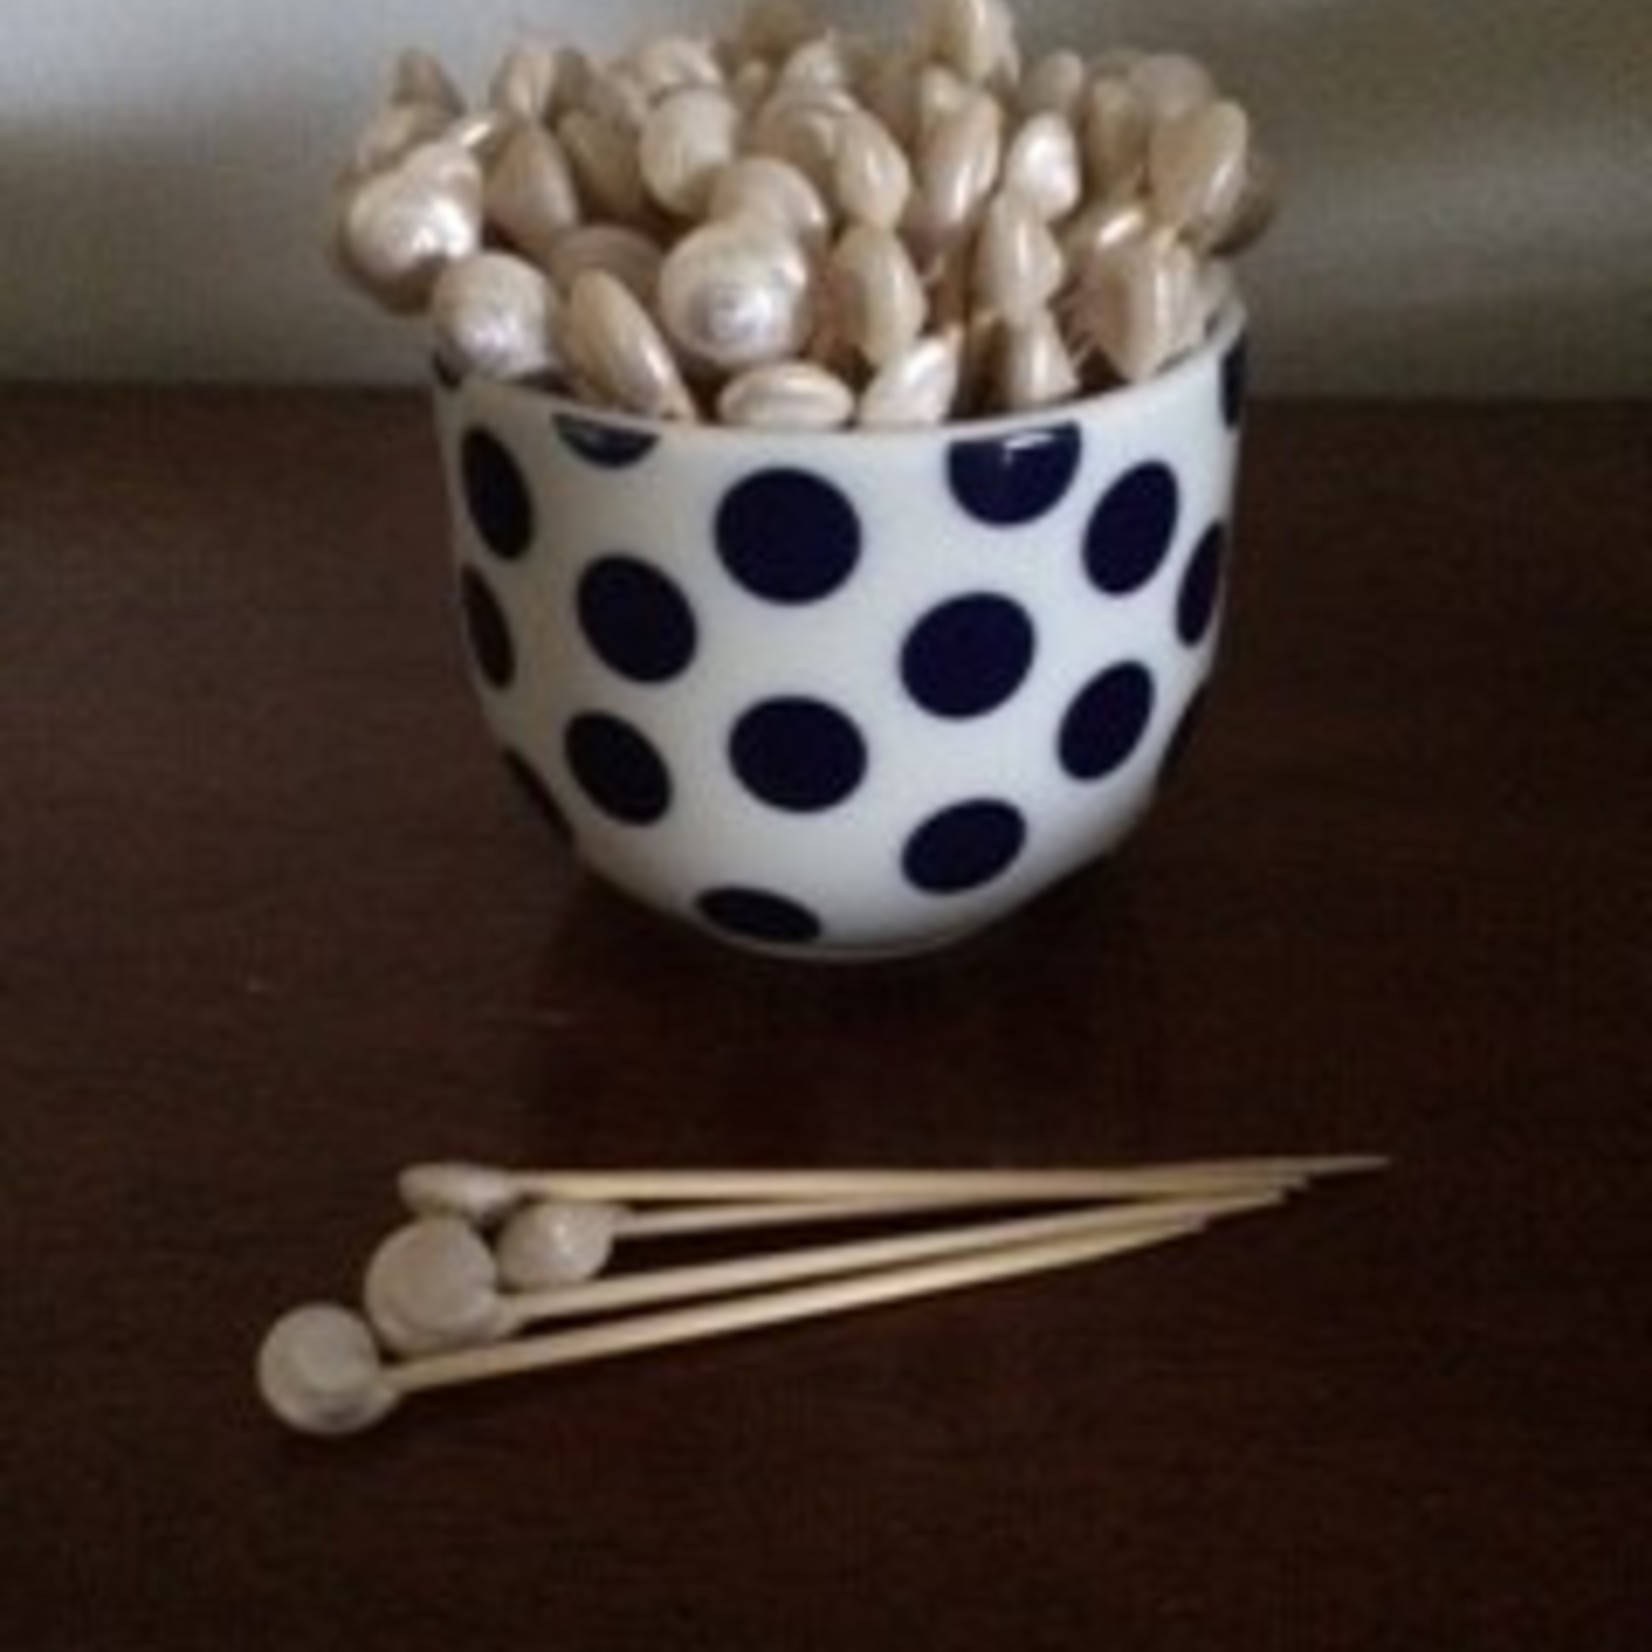 Cocktail sticks with a shell